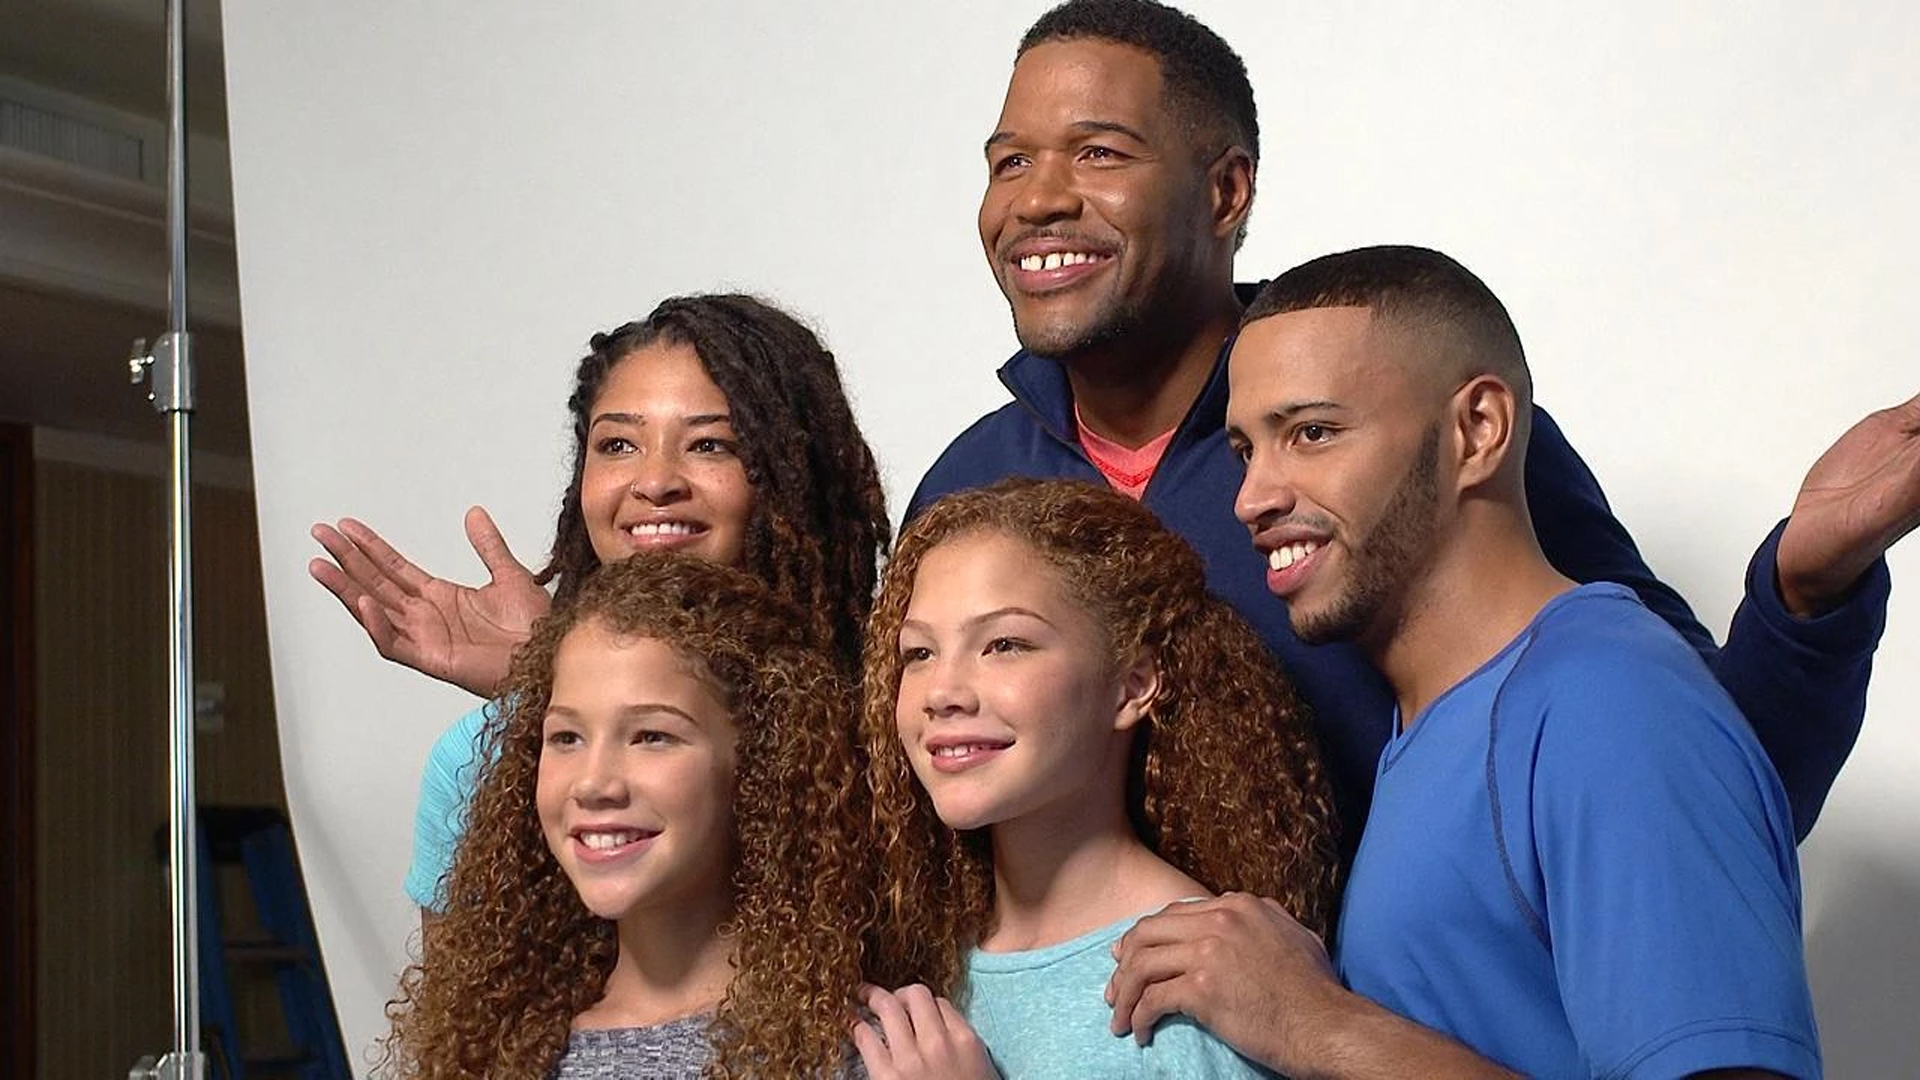 More Than A $100K Pyramid: How Michael Strahan's Kids Will Benefit From His $65M Fortune